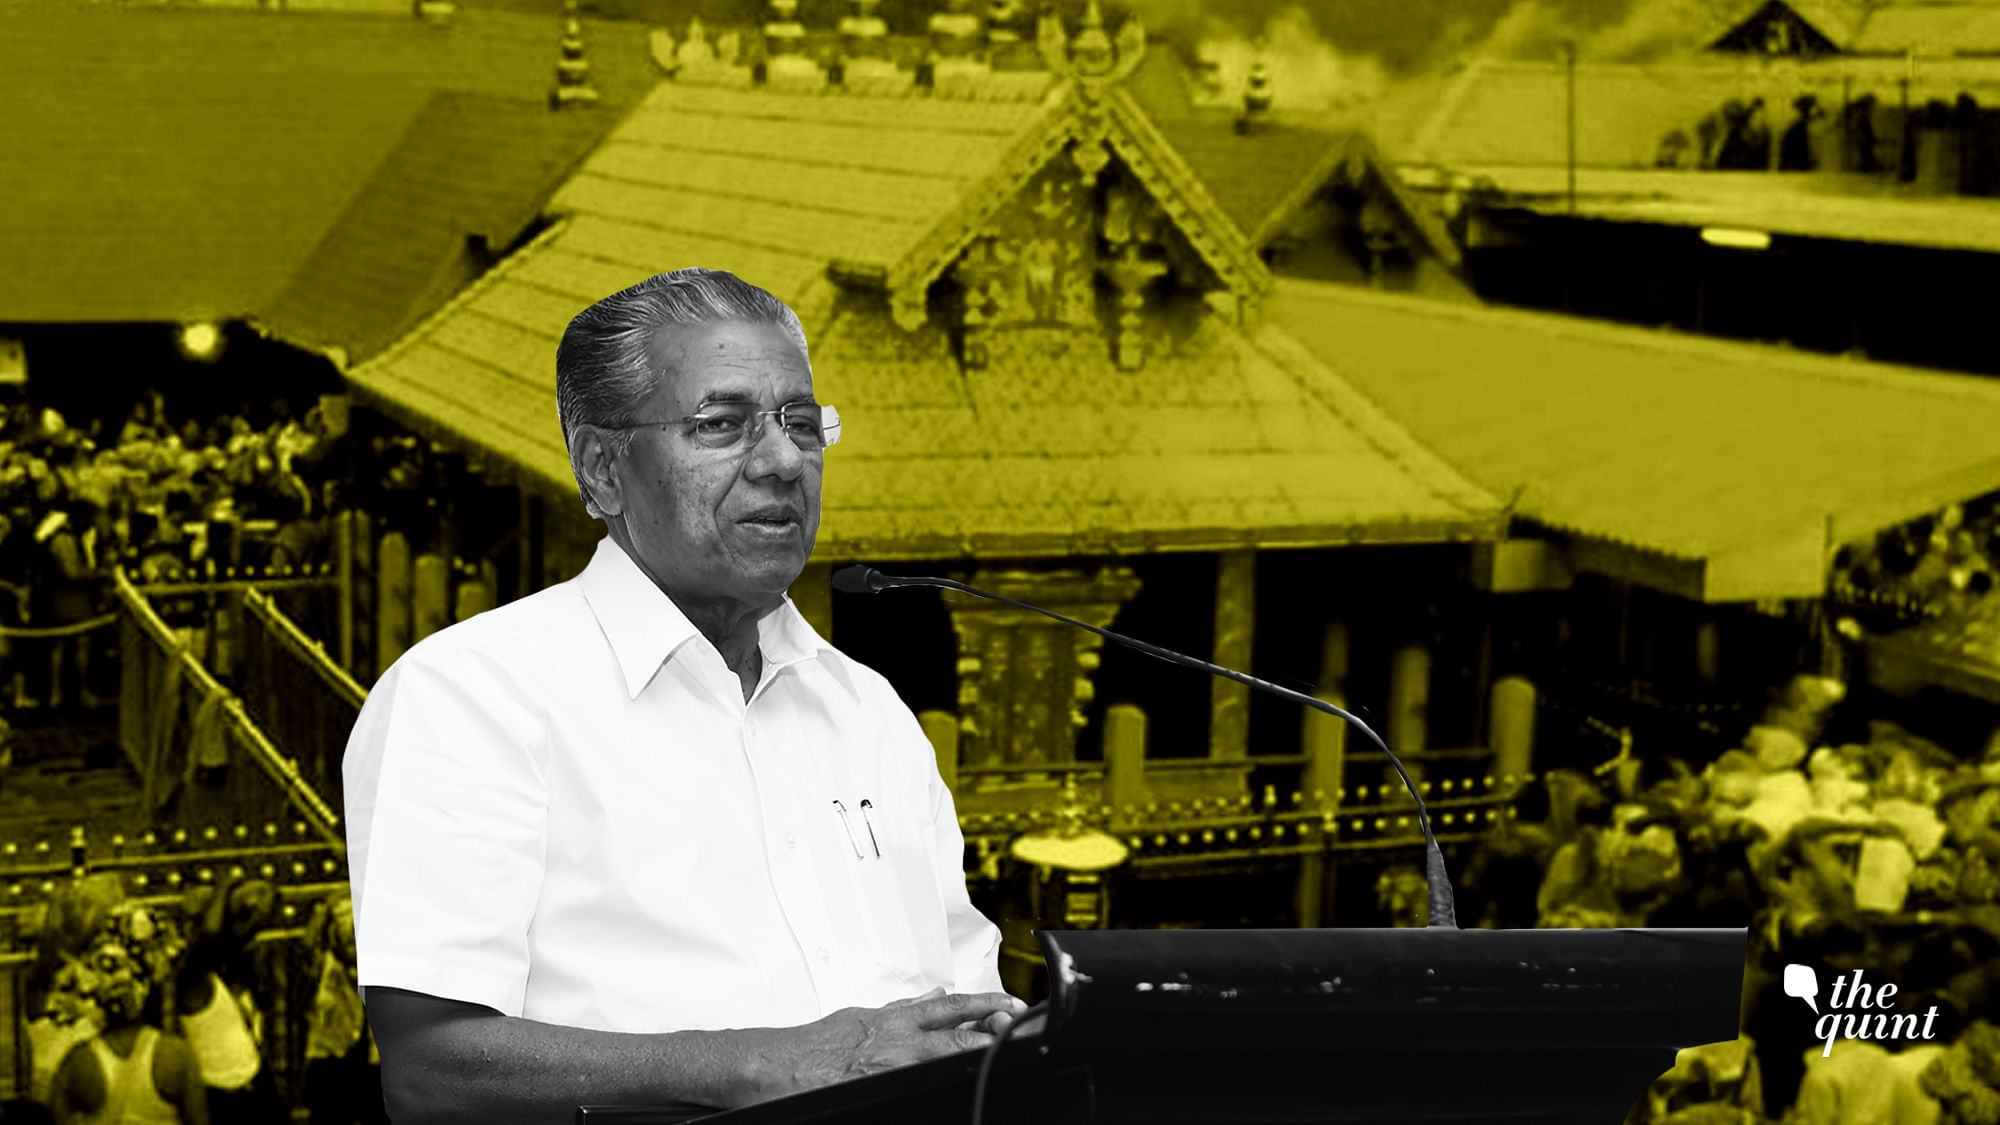 Kerala Chief Minister Pinarayi Vijayan floated the idea of a Women’s Wall in the aftermath of the Sabarimala verdict.&nbsp;